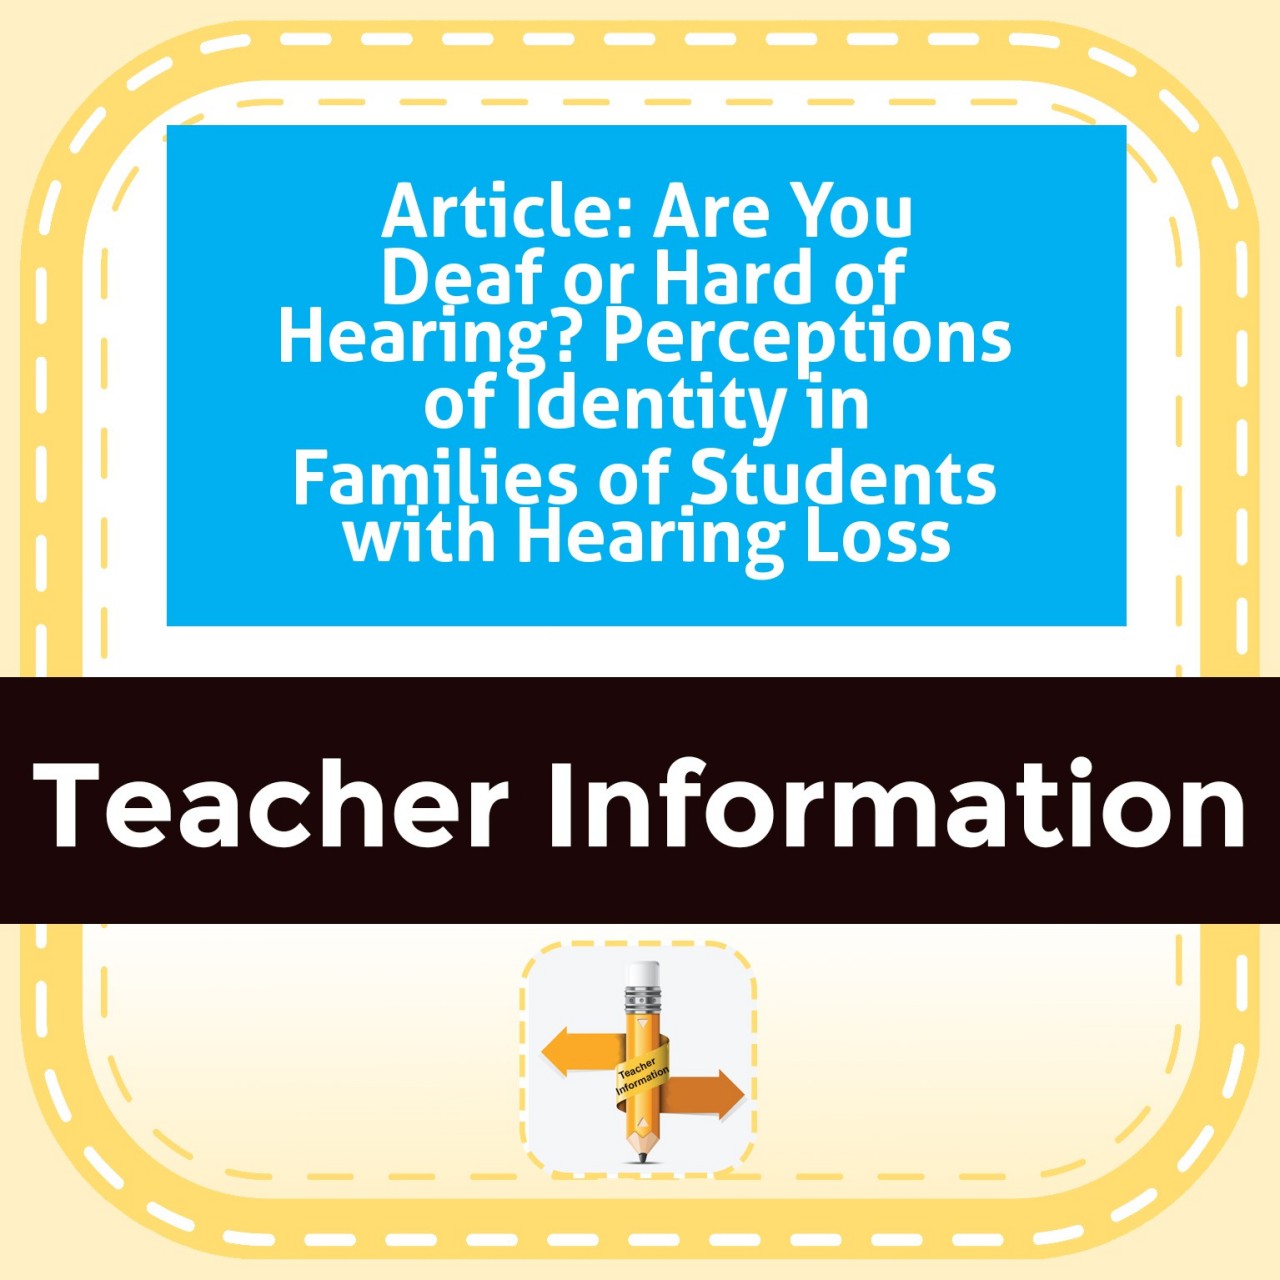 Article: Are You Deaf or Hard of Hearing? Perceptions of Identity in Families of Students with Hearing Loss